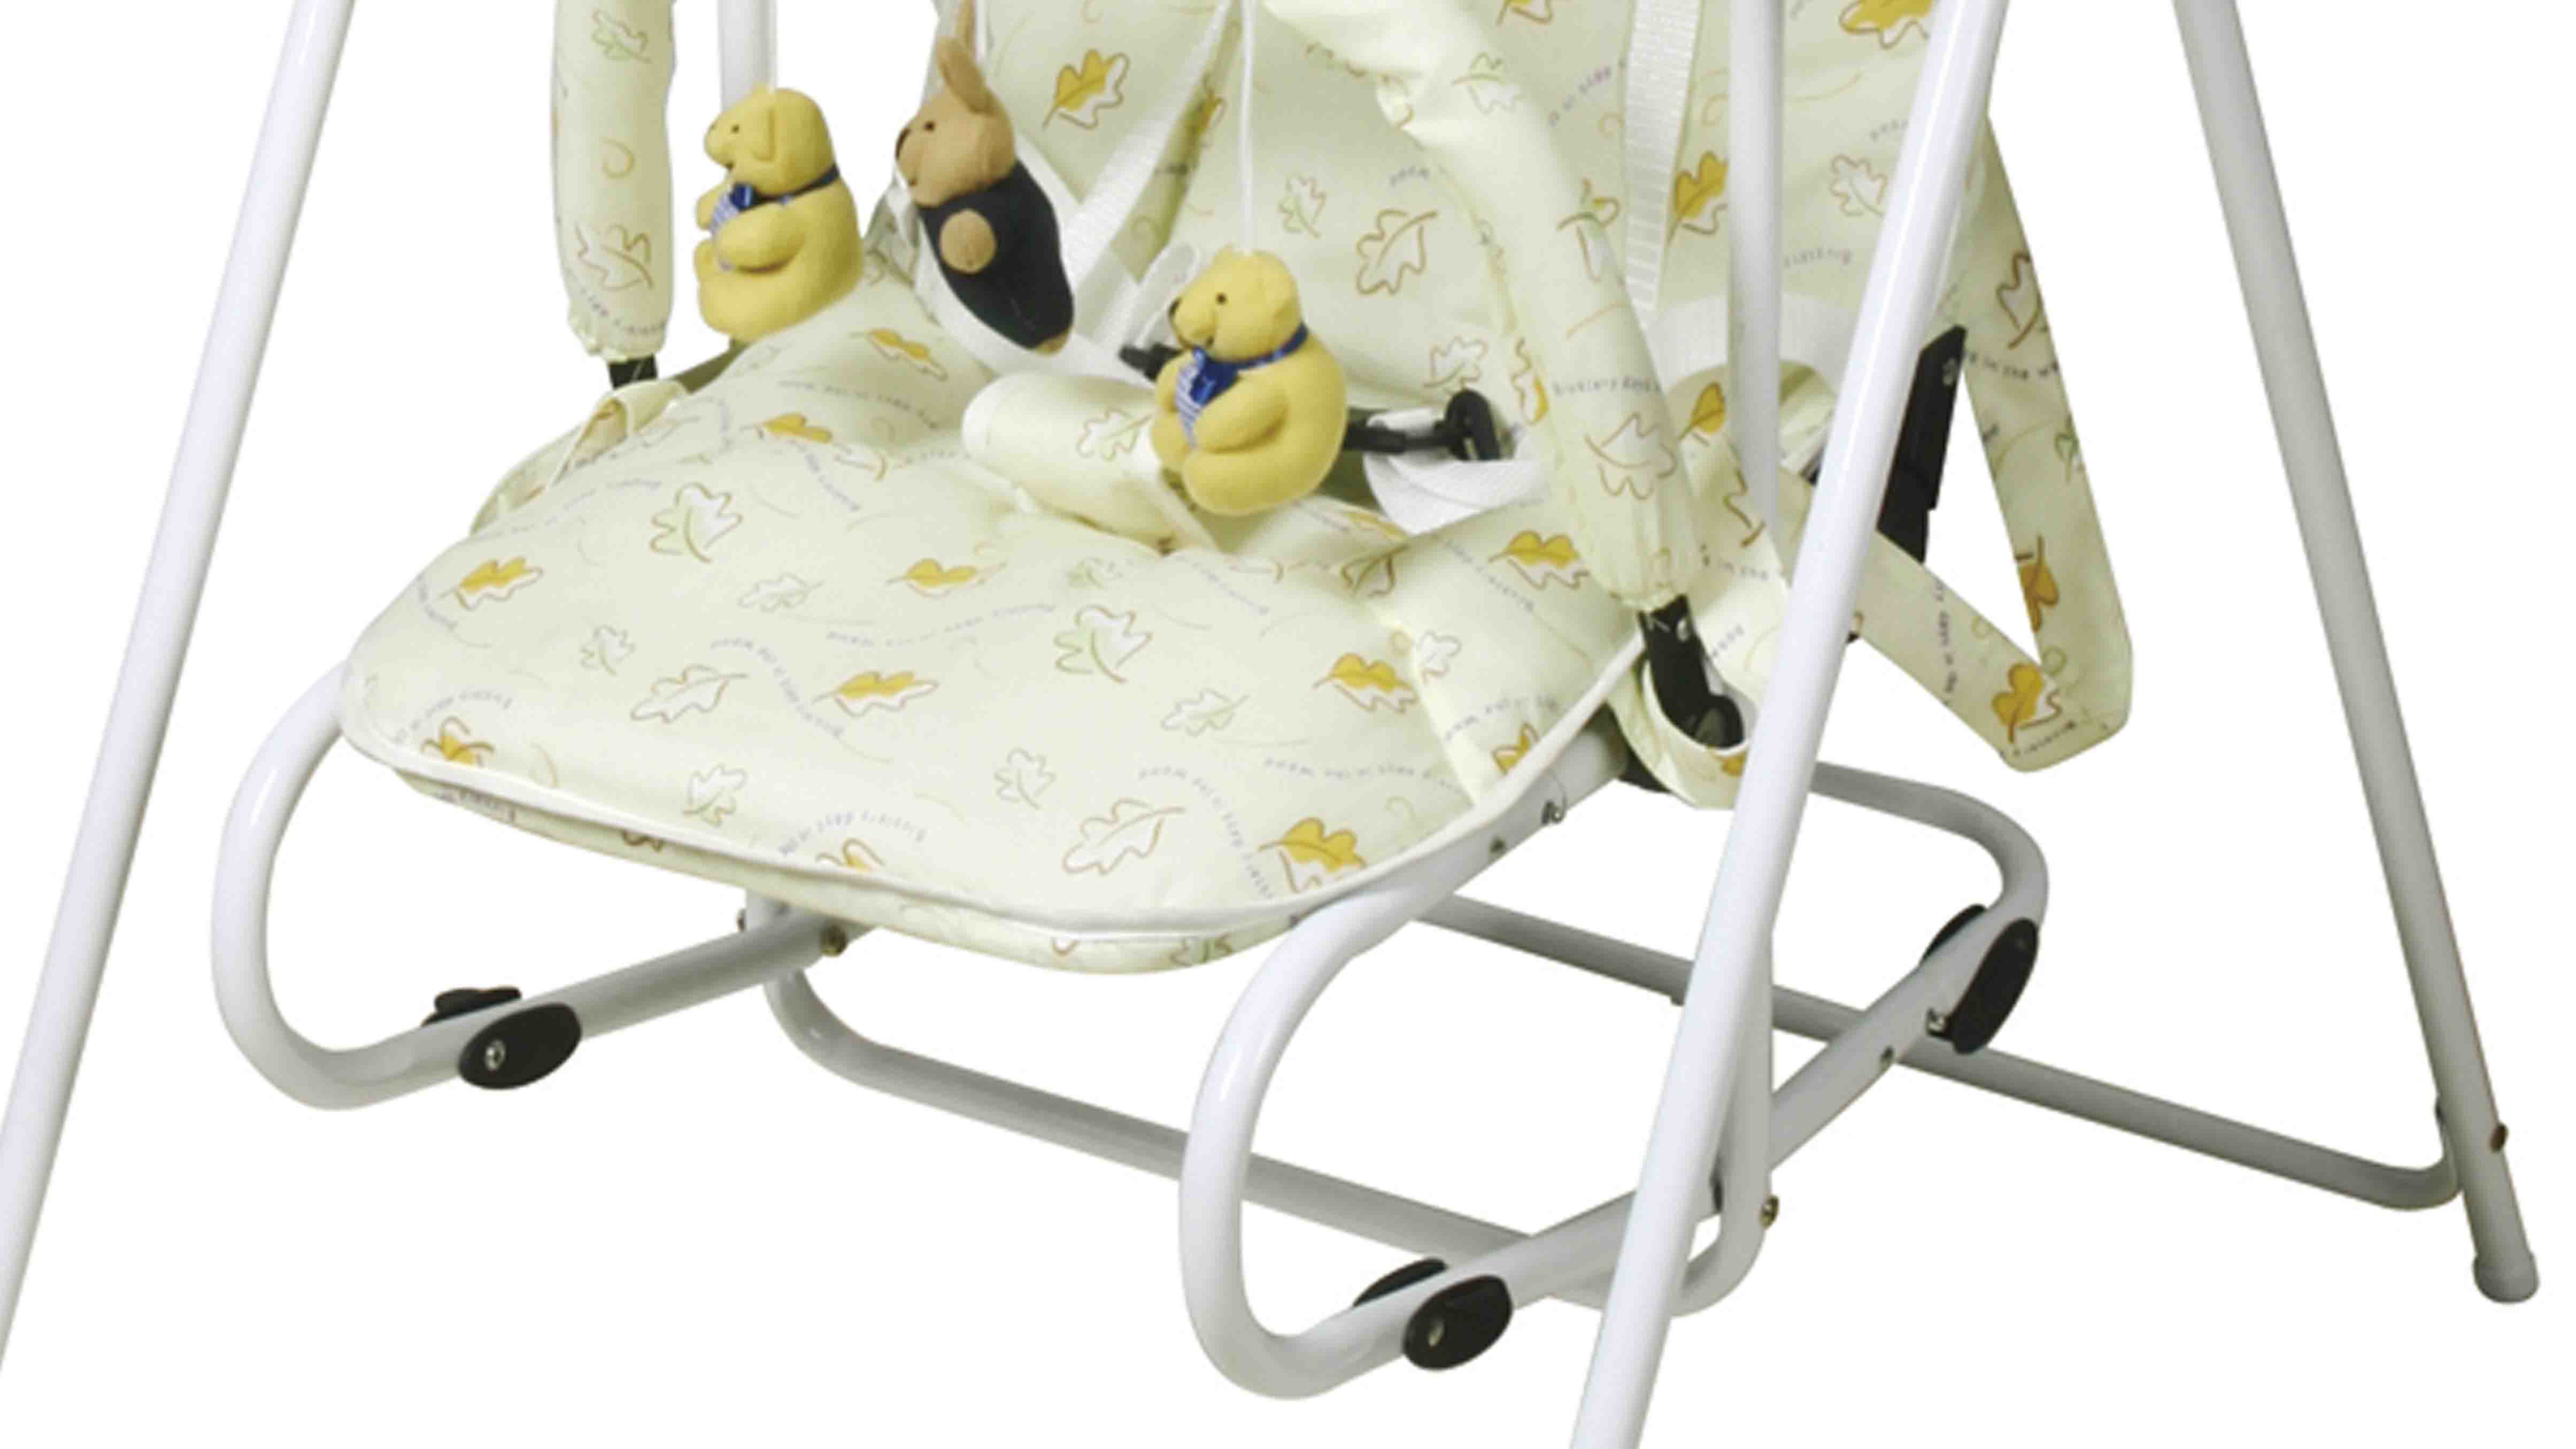 Aoqi cheap baby swings for sale inquire now for household